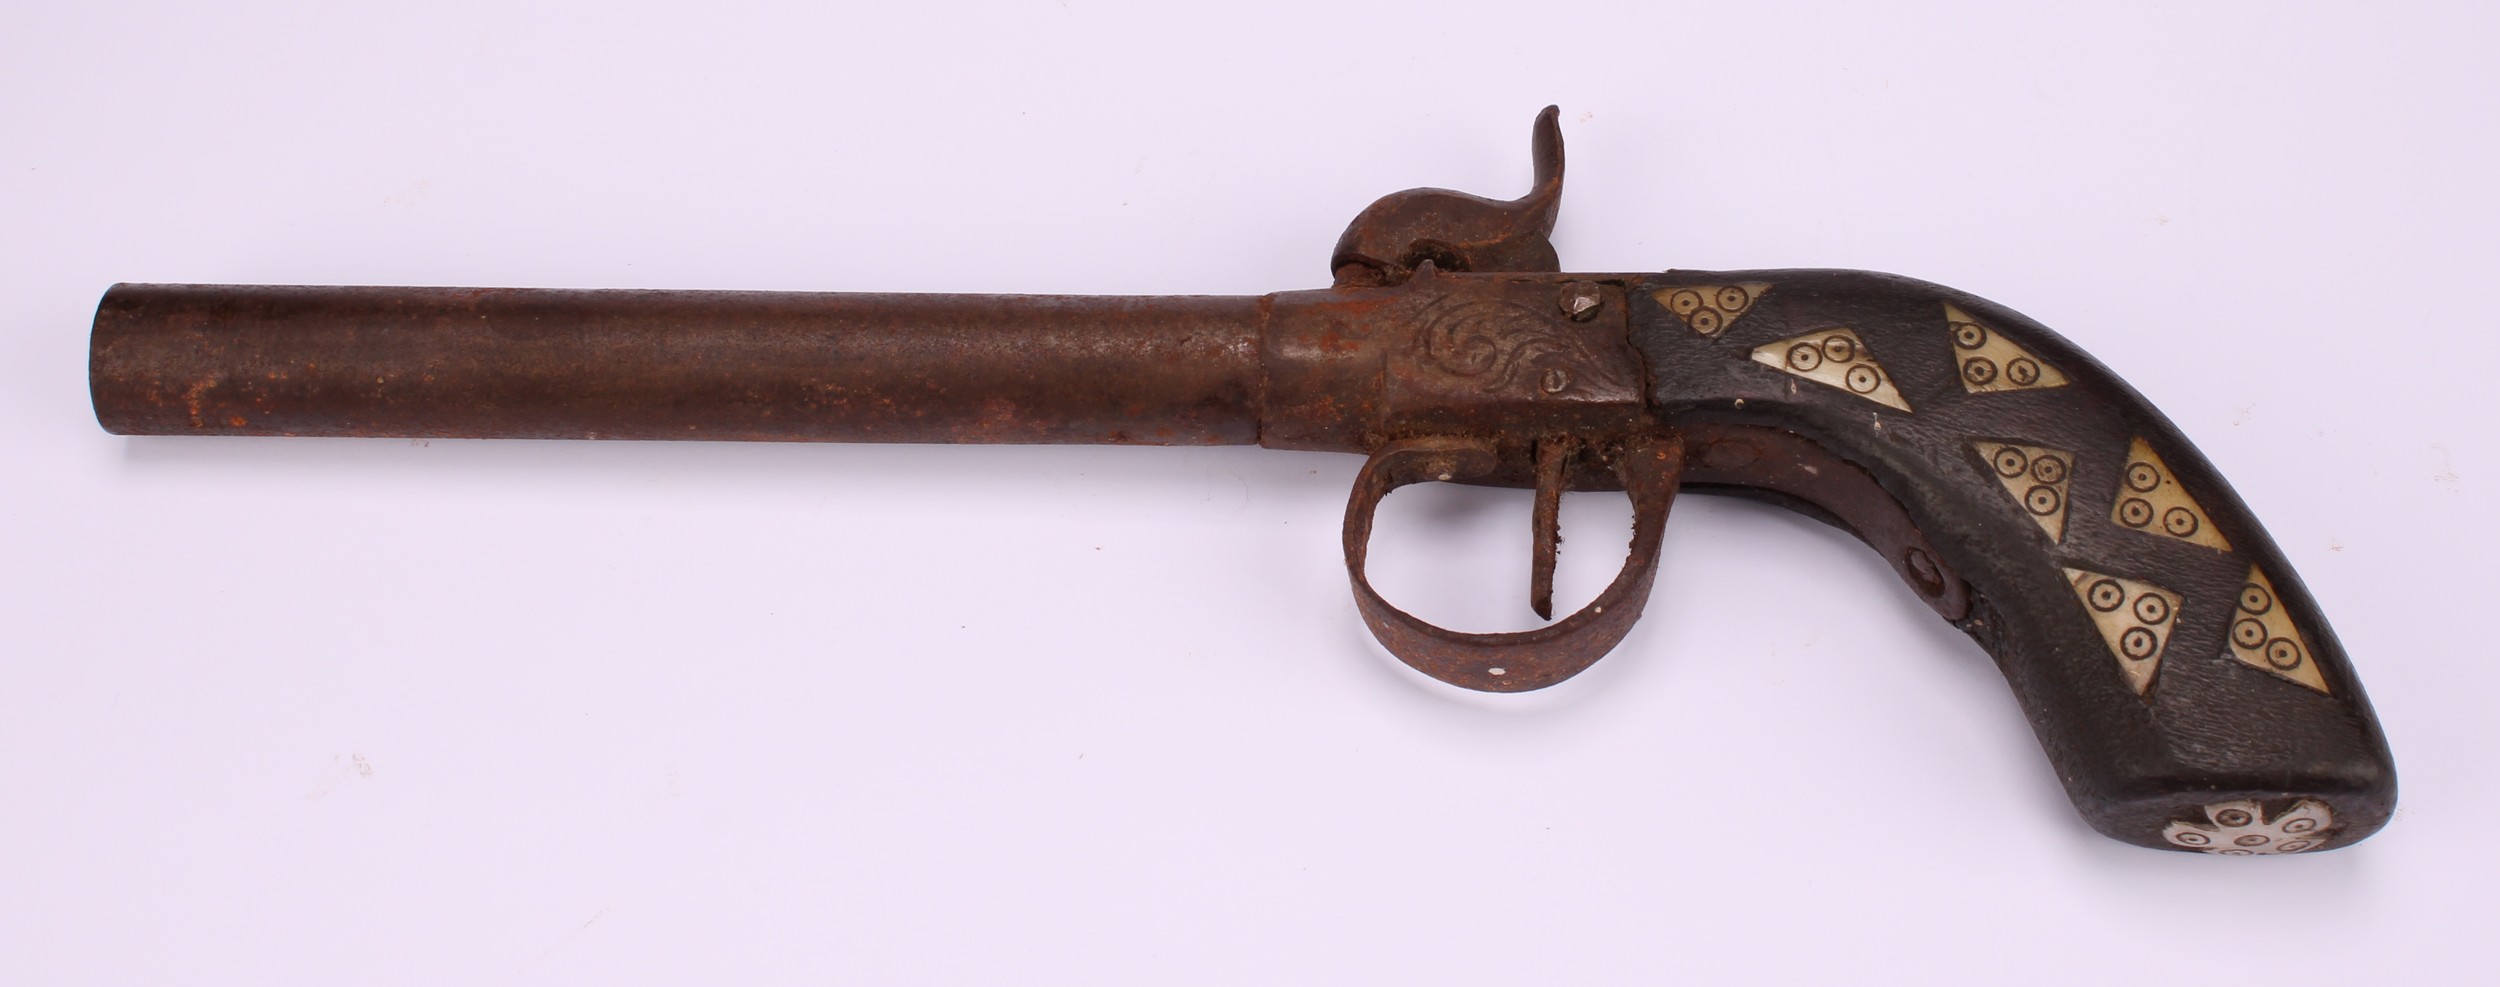 A 19th century percussion belt pistol, 13.5cm octagonal barrel, integral ramrod, chequered grip, - Image 10 of 10